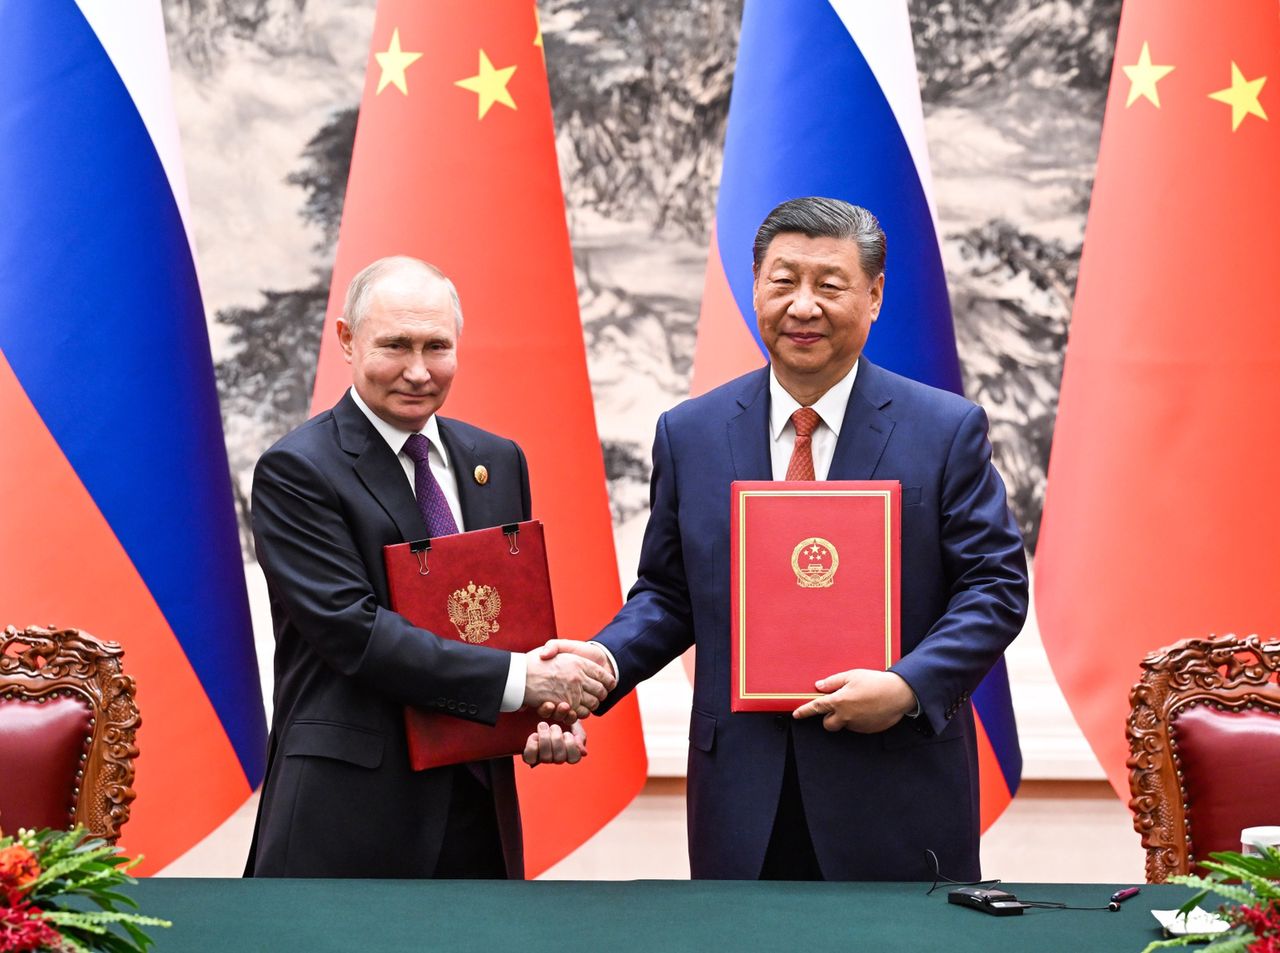 Putin seeks Chinese deal to counter Western sanctions